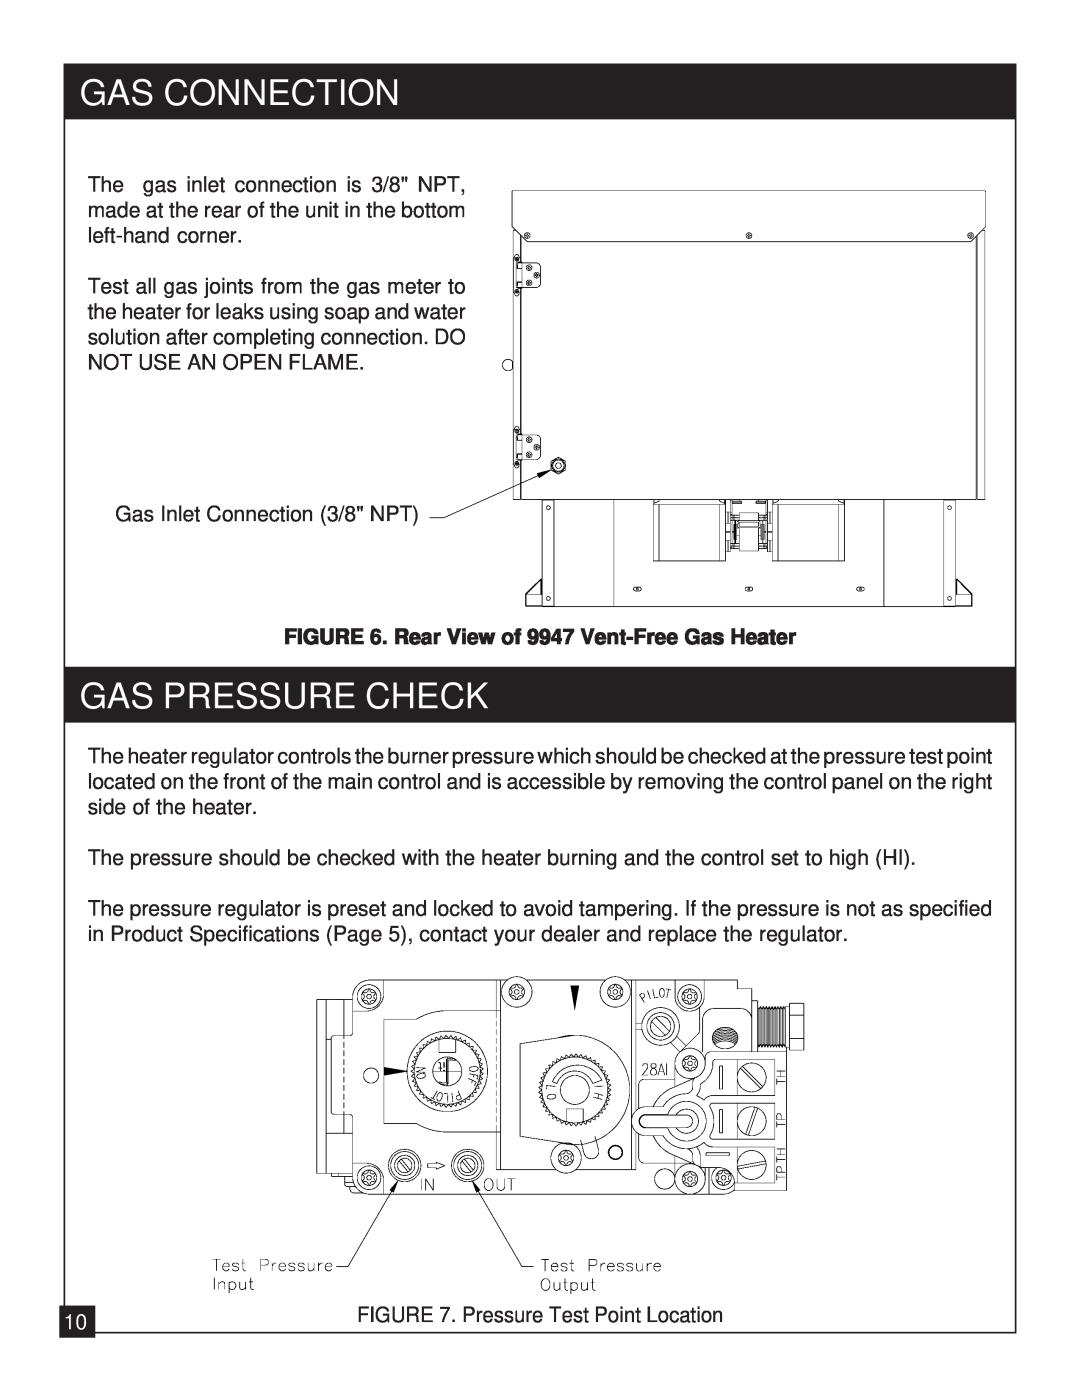 United States Stove installation manual Gas Pressure Check, Gas Connection, Rear View of 9947 Vent-FreeGas Heater 